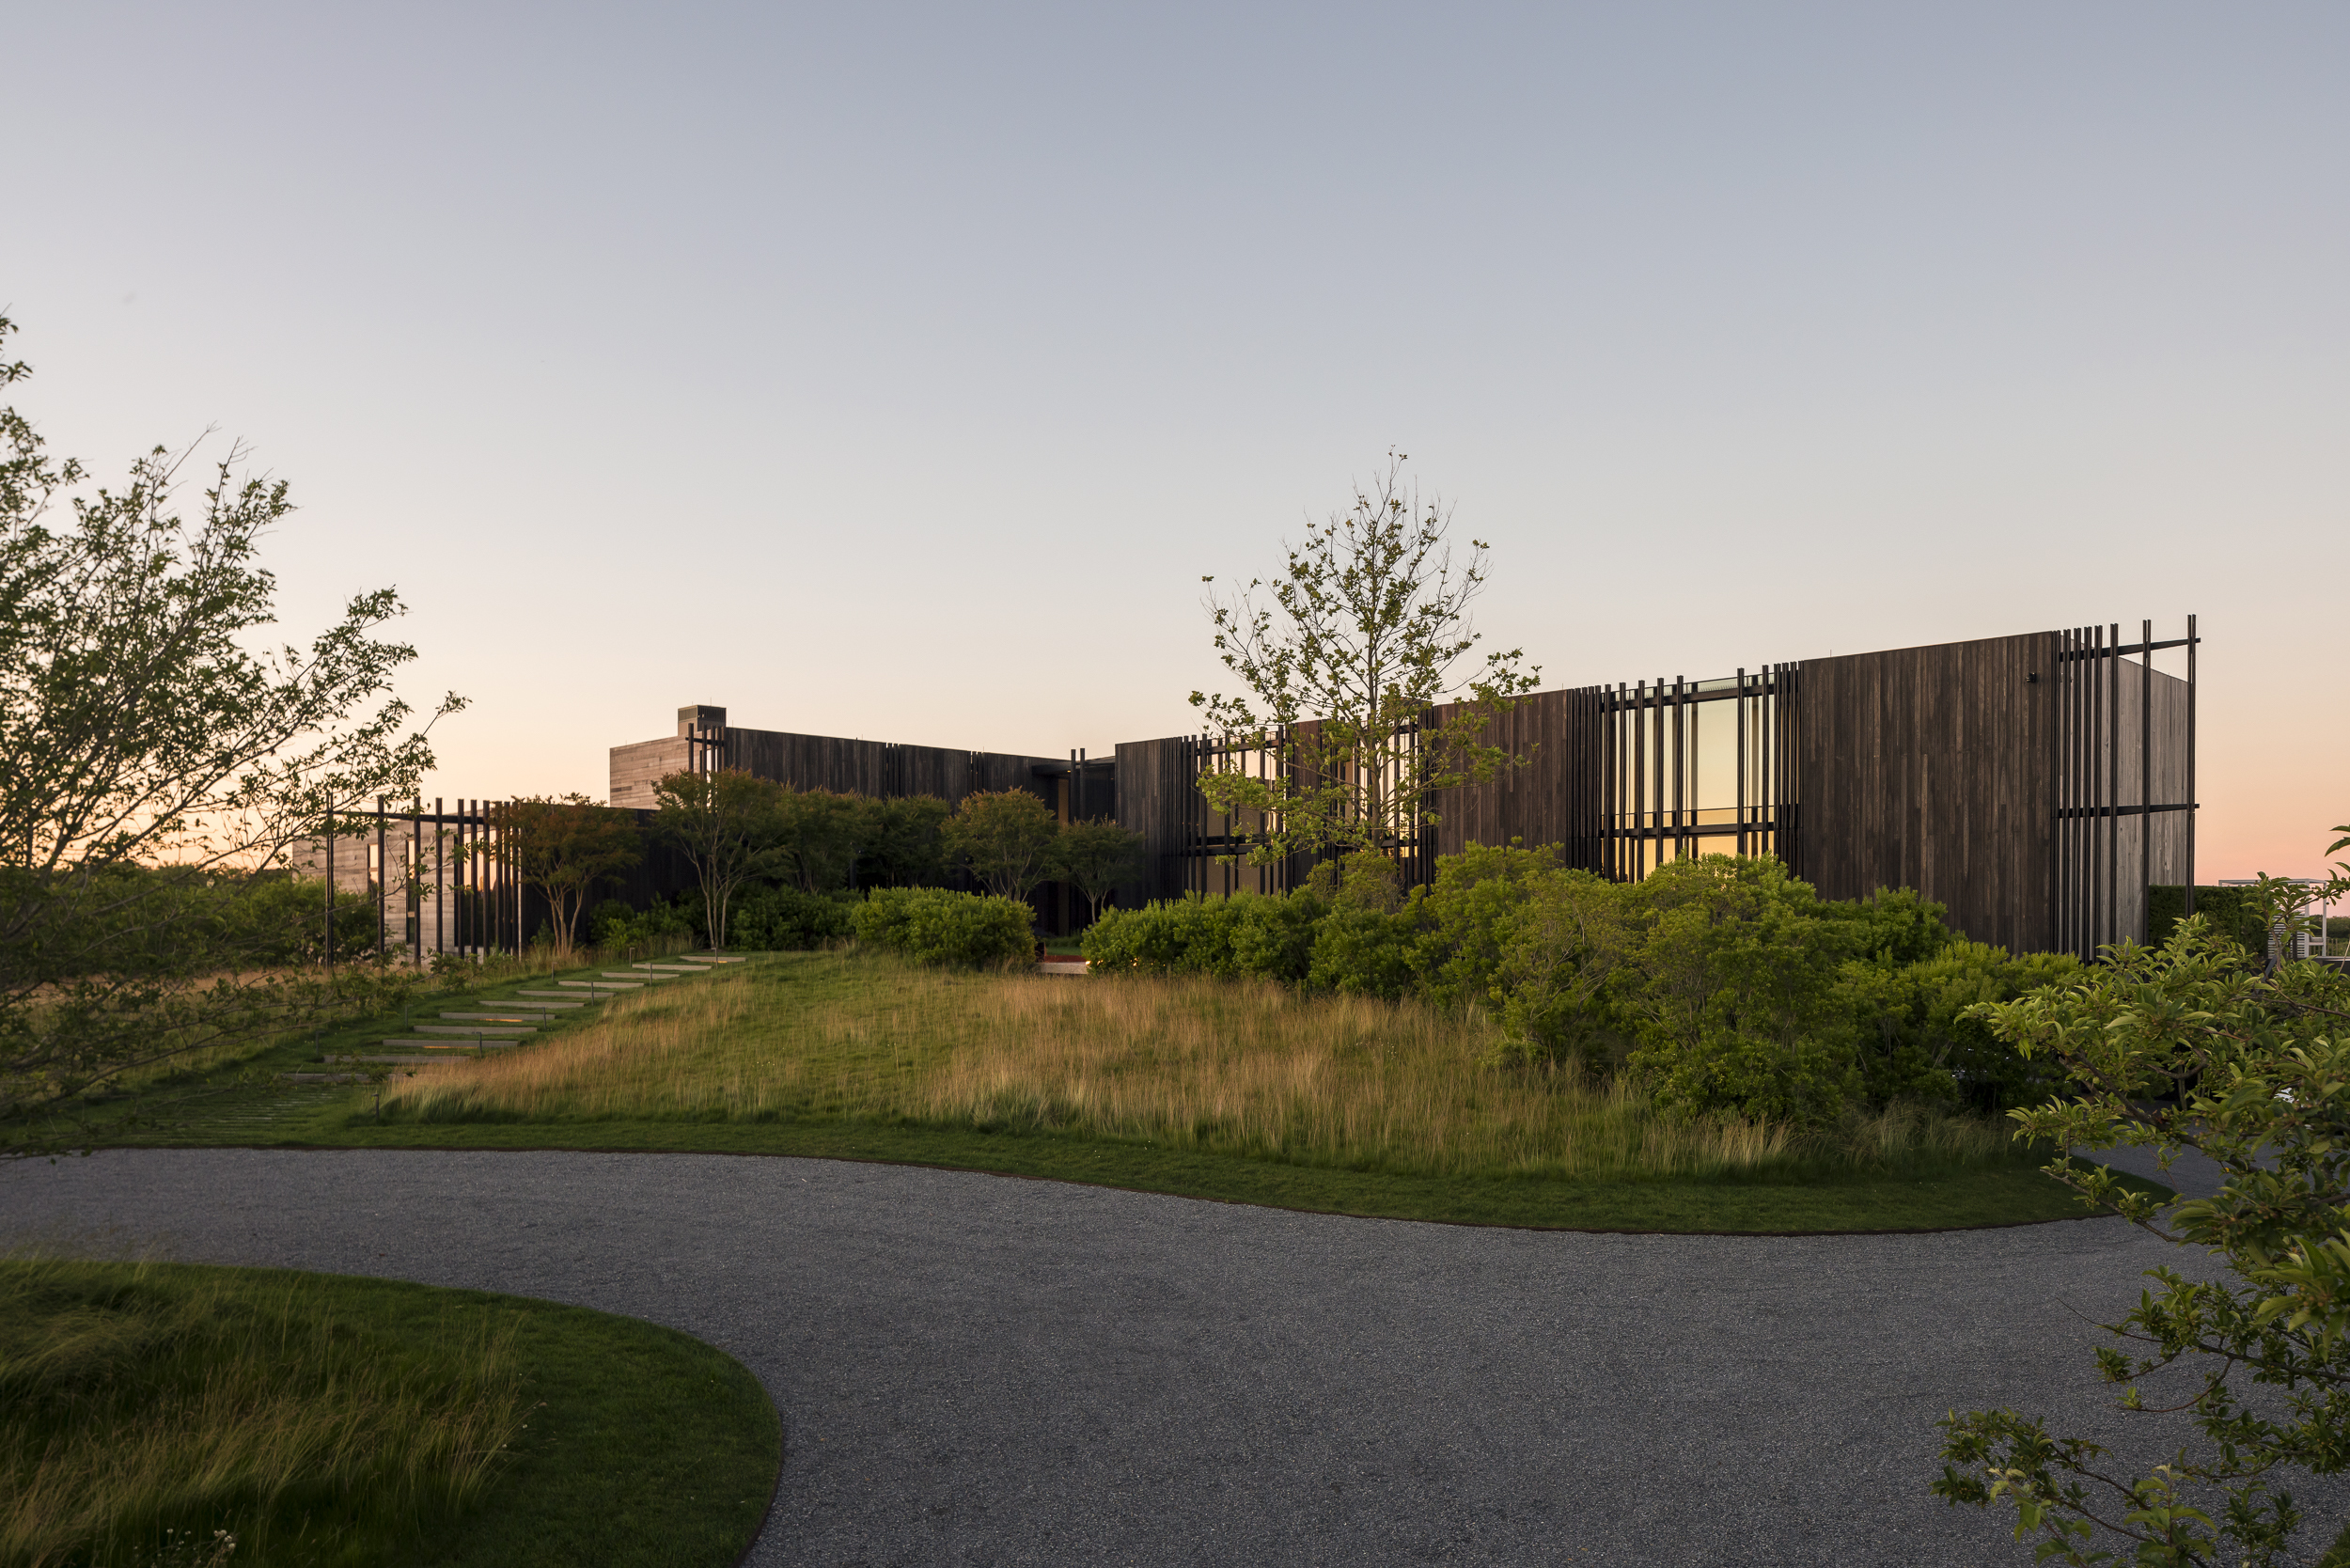 A residence on Jule Pond by BMA Architects with landscape architecture by LaGuardia Design Group will be part of the Southampton Arts Center Architecture + Design Tour. MICHAEL STAVARIDIS